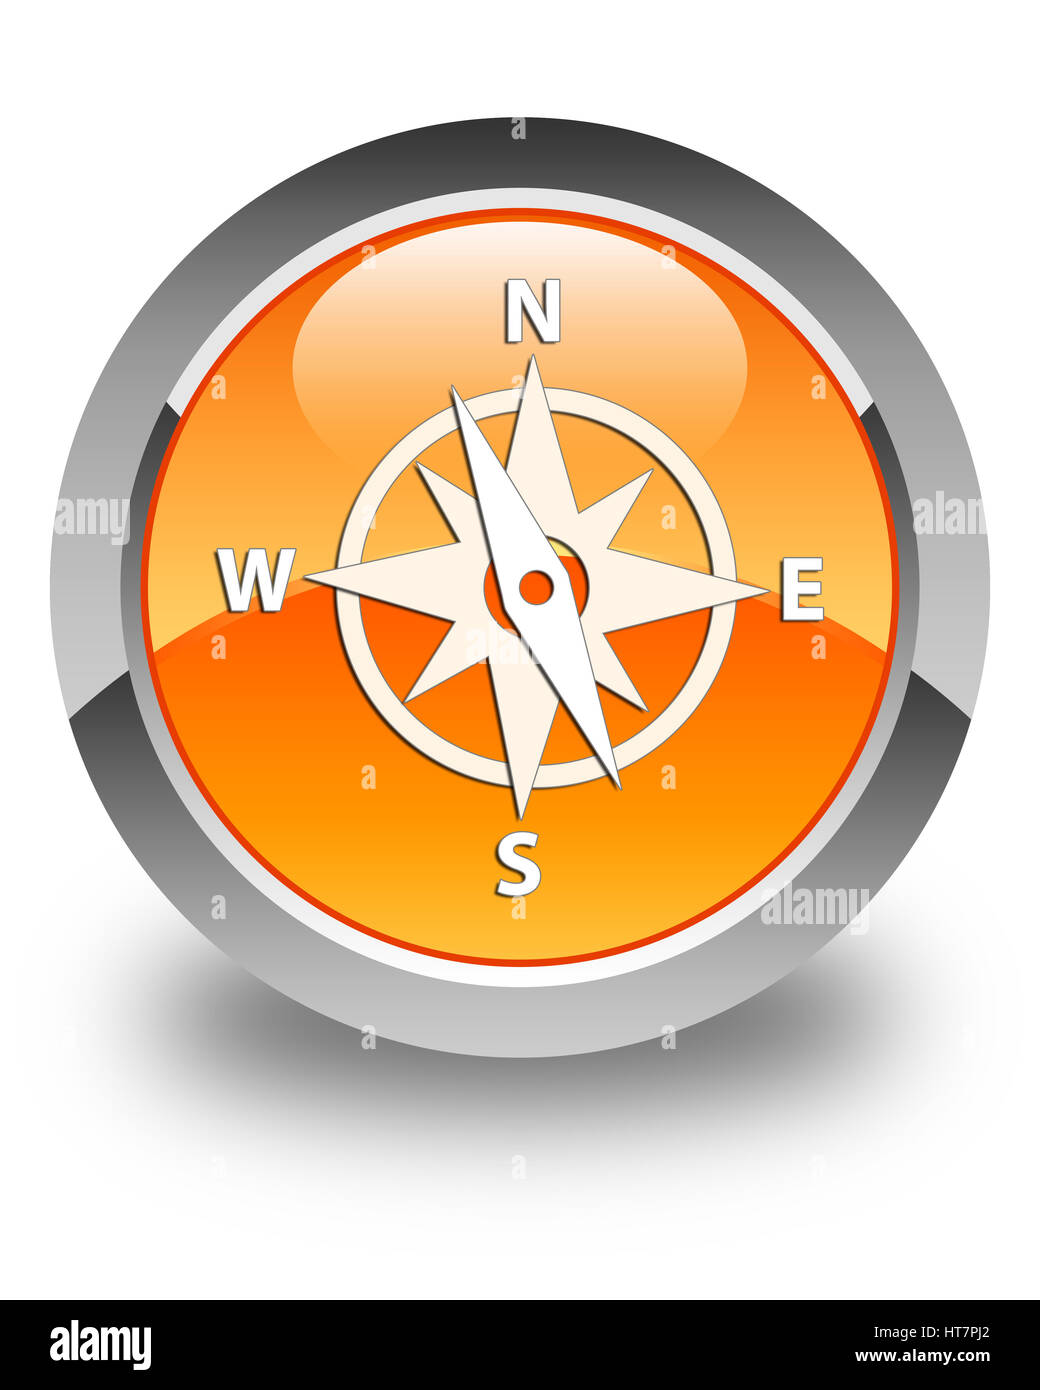 Compass icon isolated on glossy orange round button abstract illustration Stock Photo